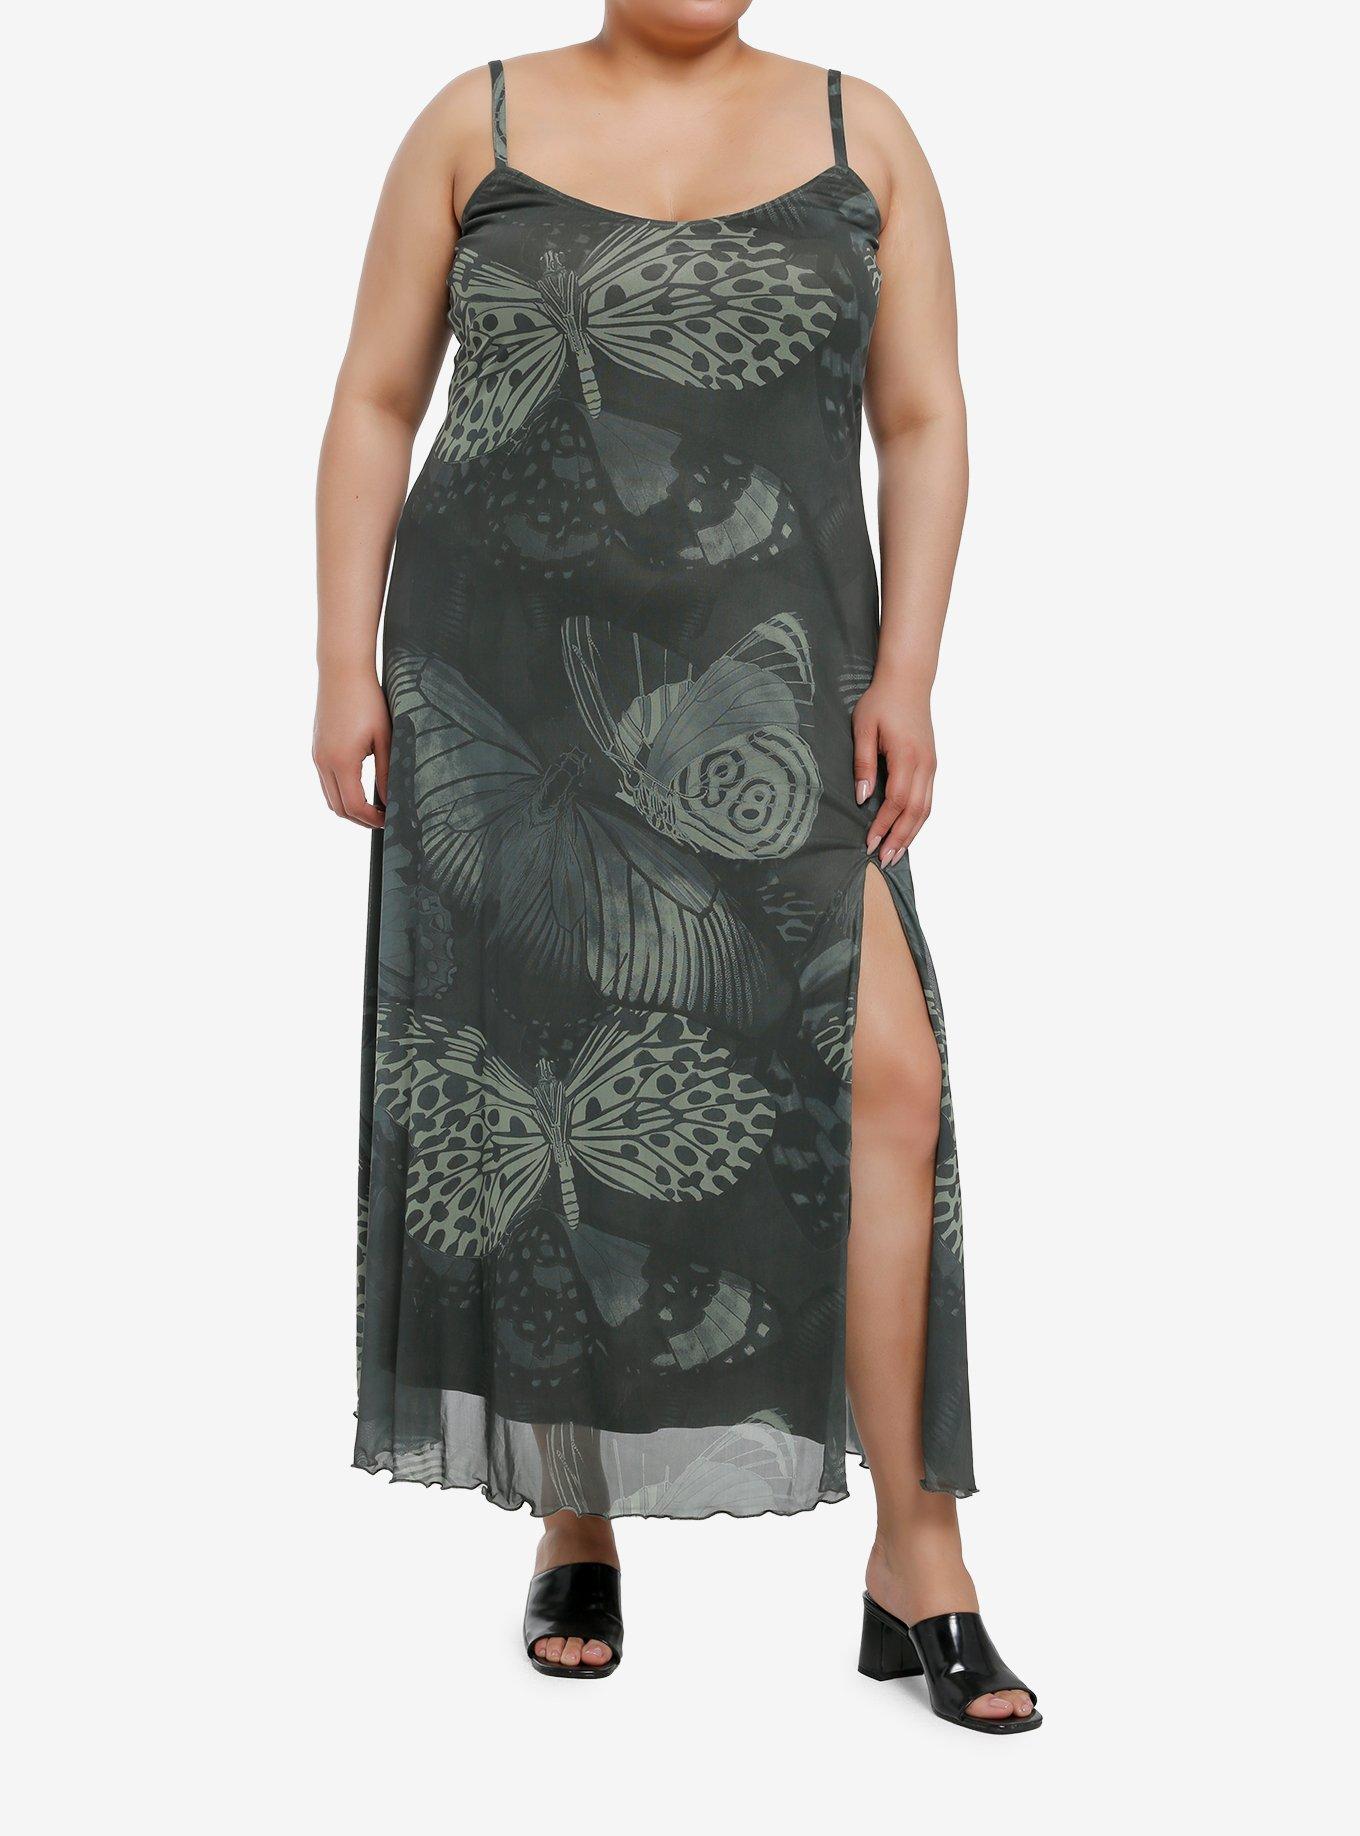 Thorn & Fable Green Butterfly Slit Maxi Dress Plus Size